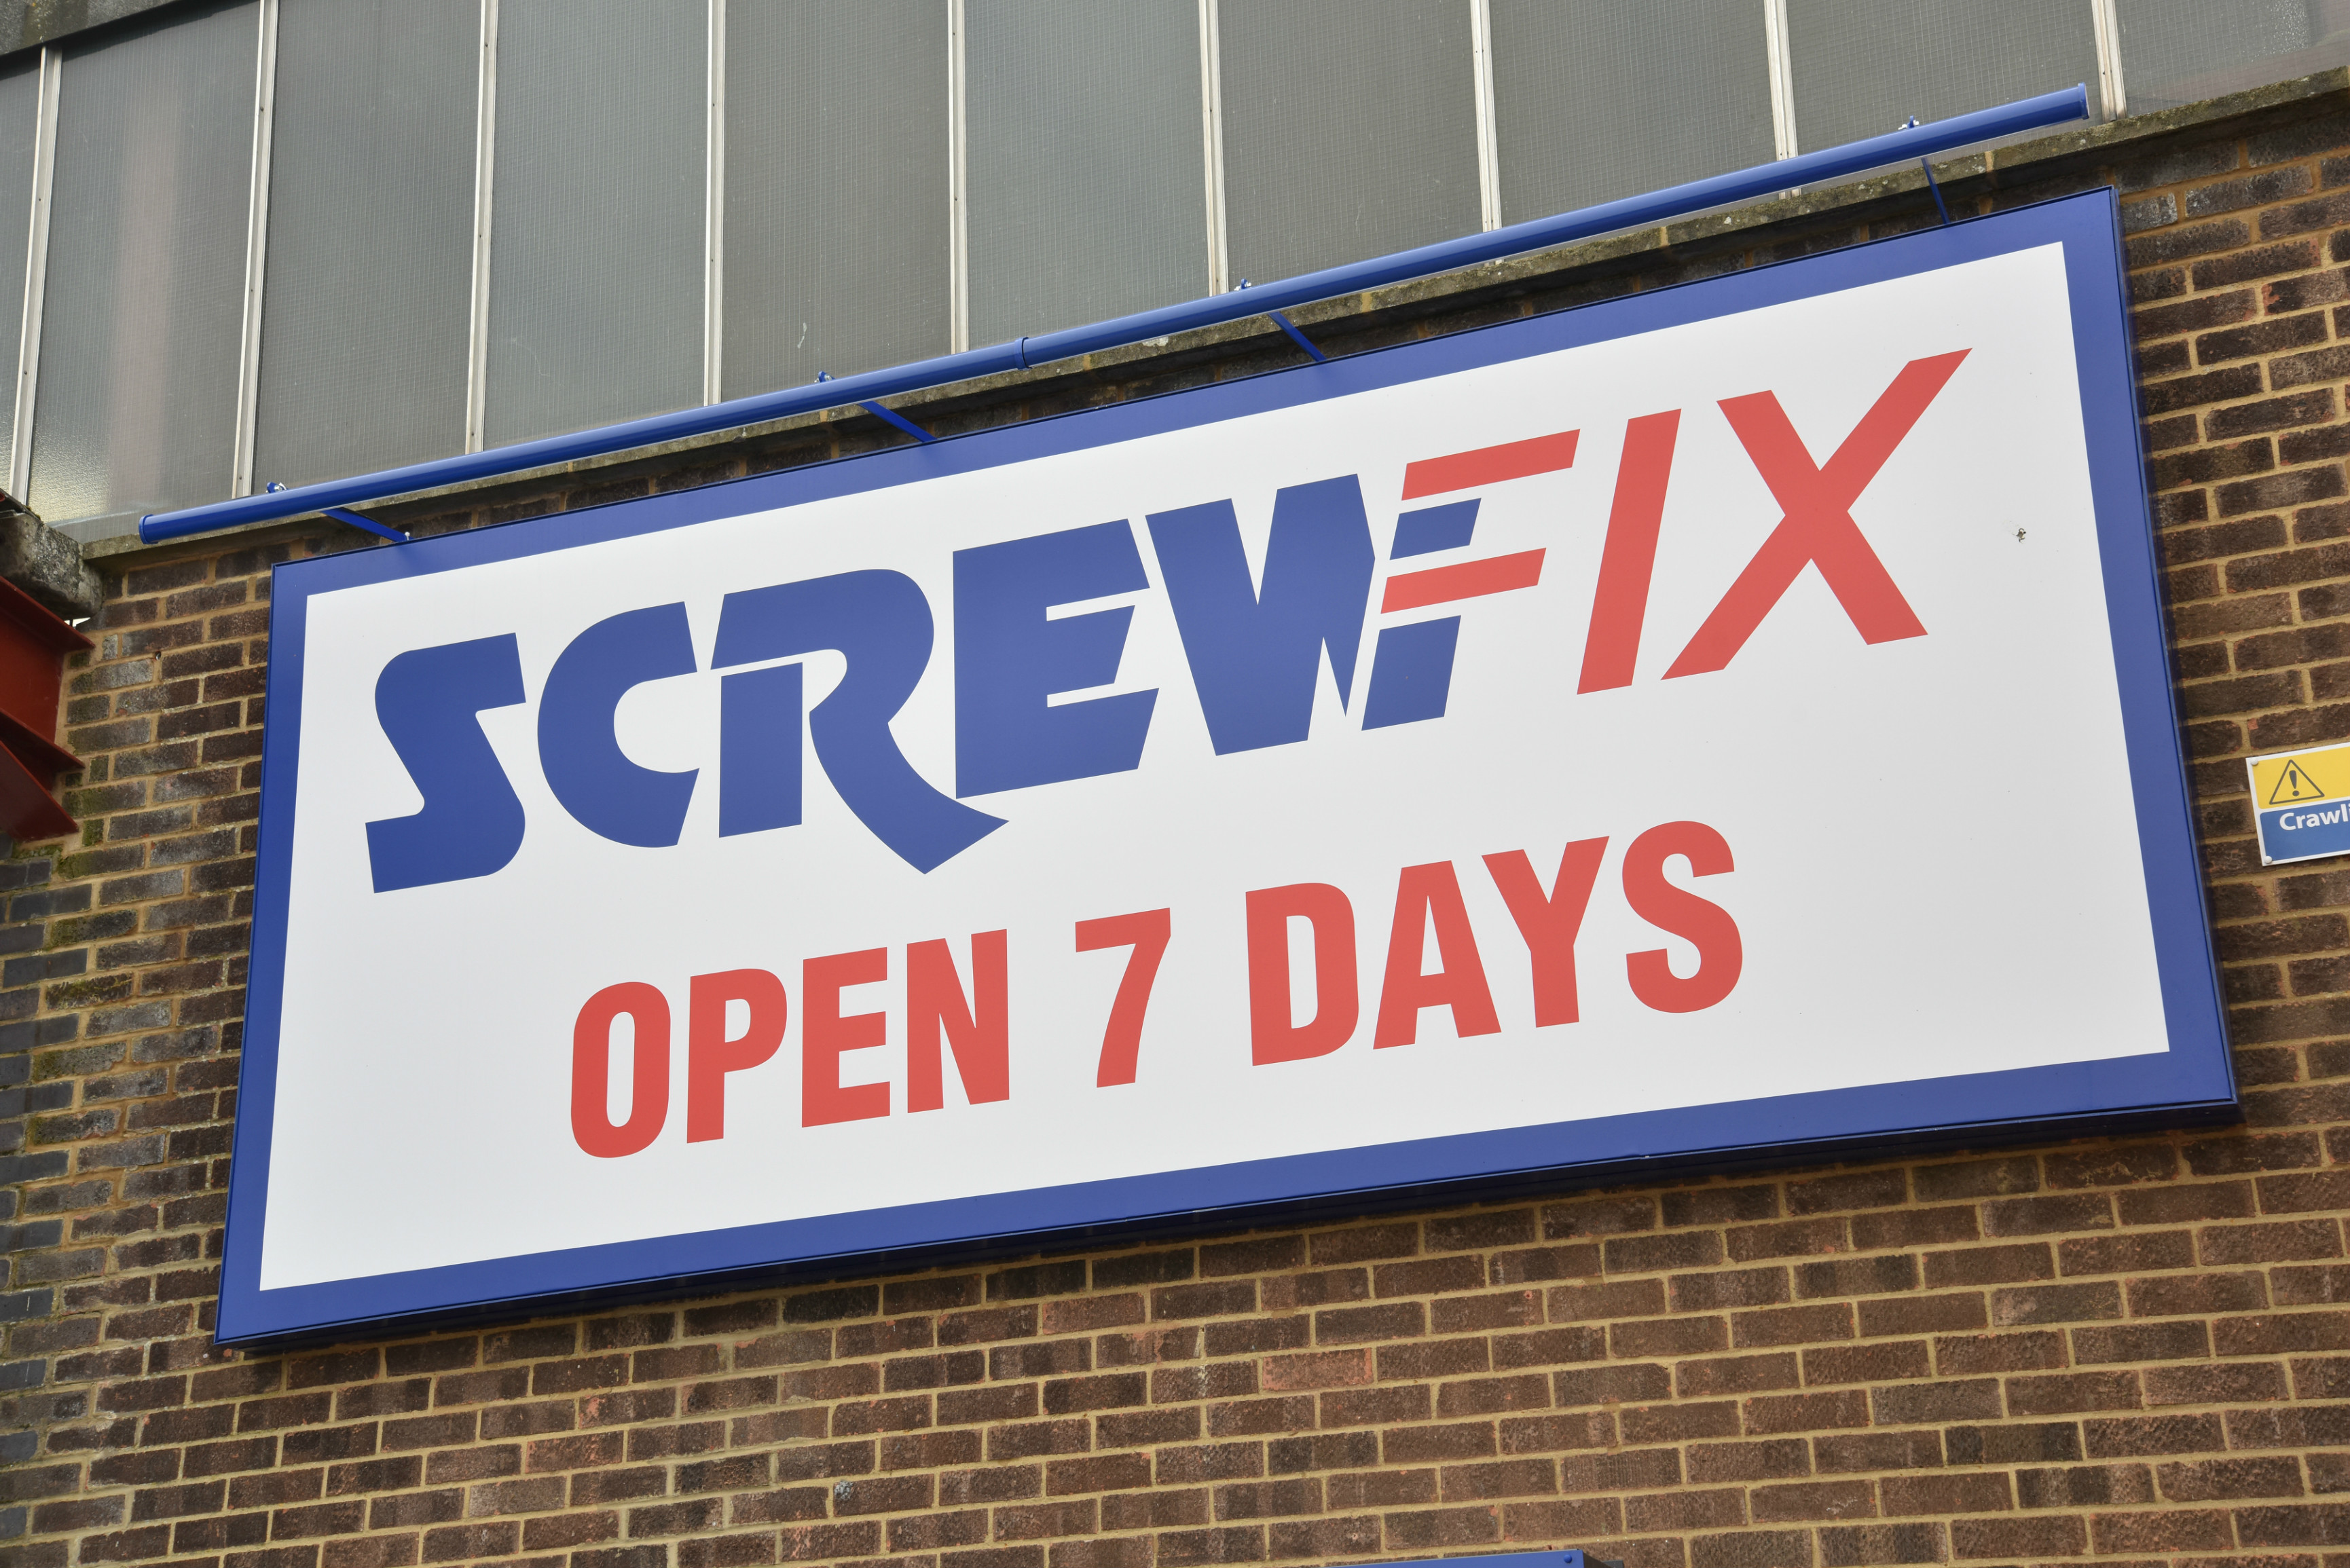 Jobs boost for Cleckheaton as new Screwfix store opens